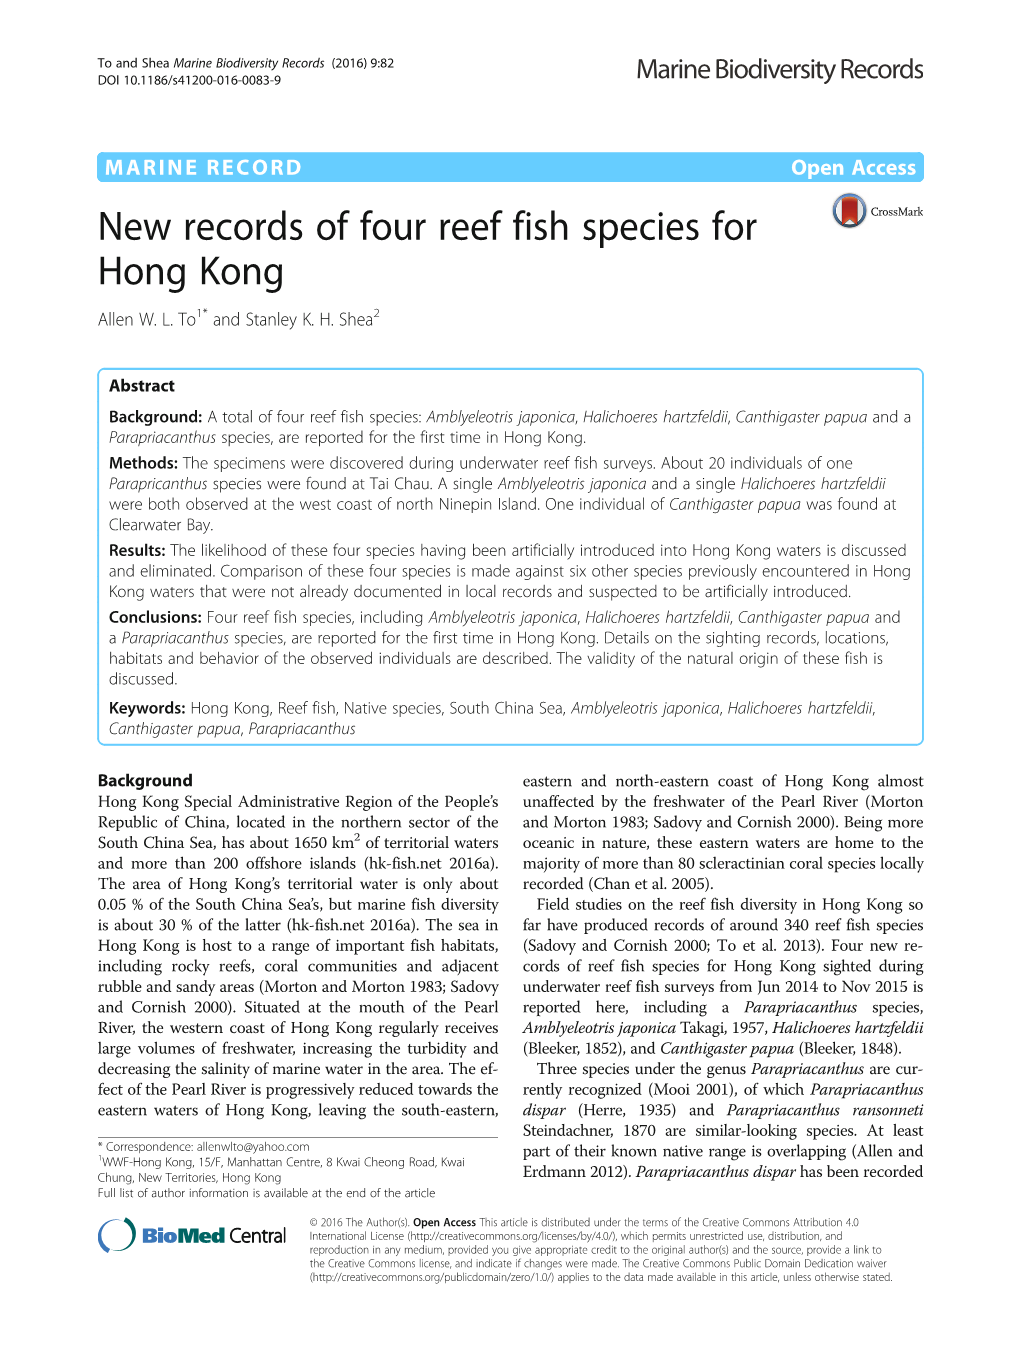 New Records of Four Reef Fish Species for Hong Kong Allen W